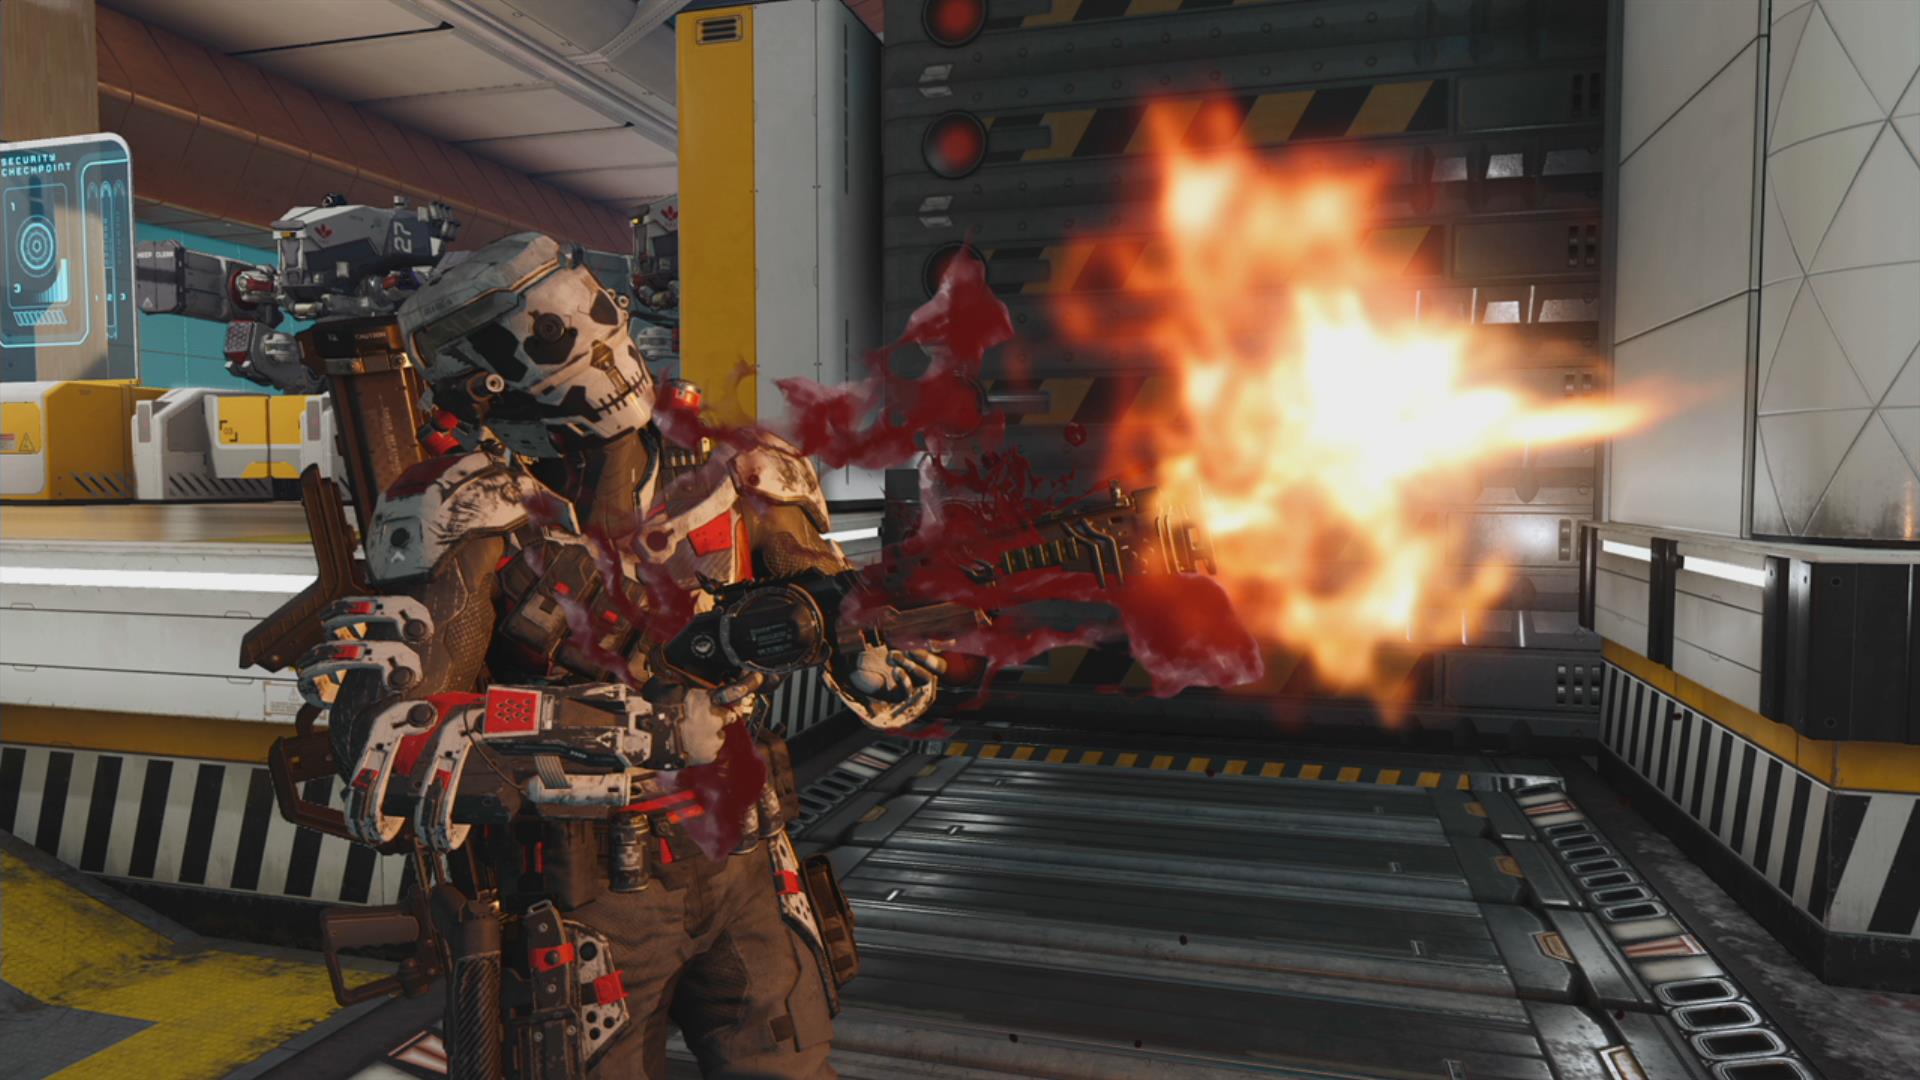 My Favourite Black Ops III Feature So Far Is Theatre Mode